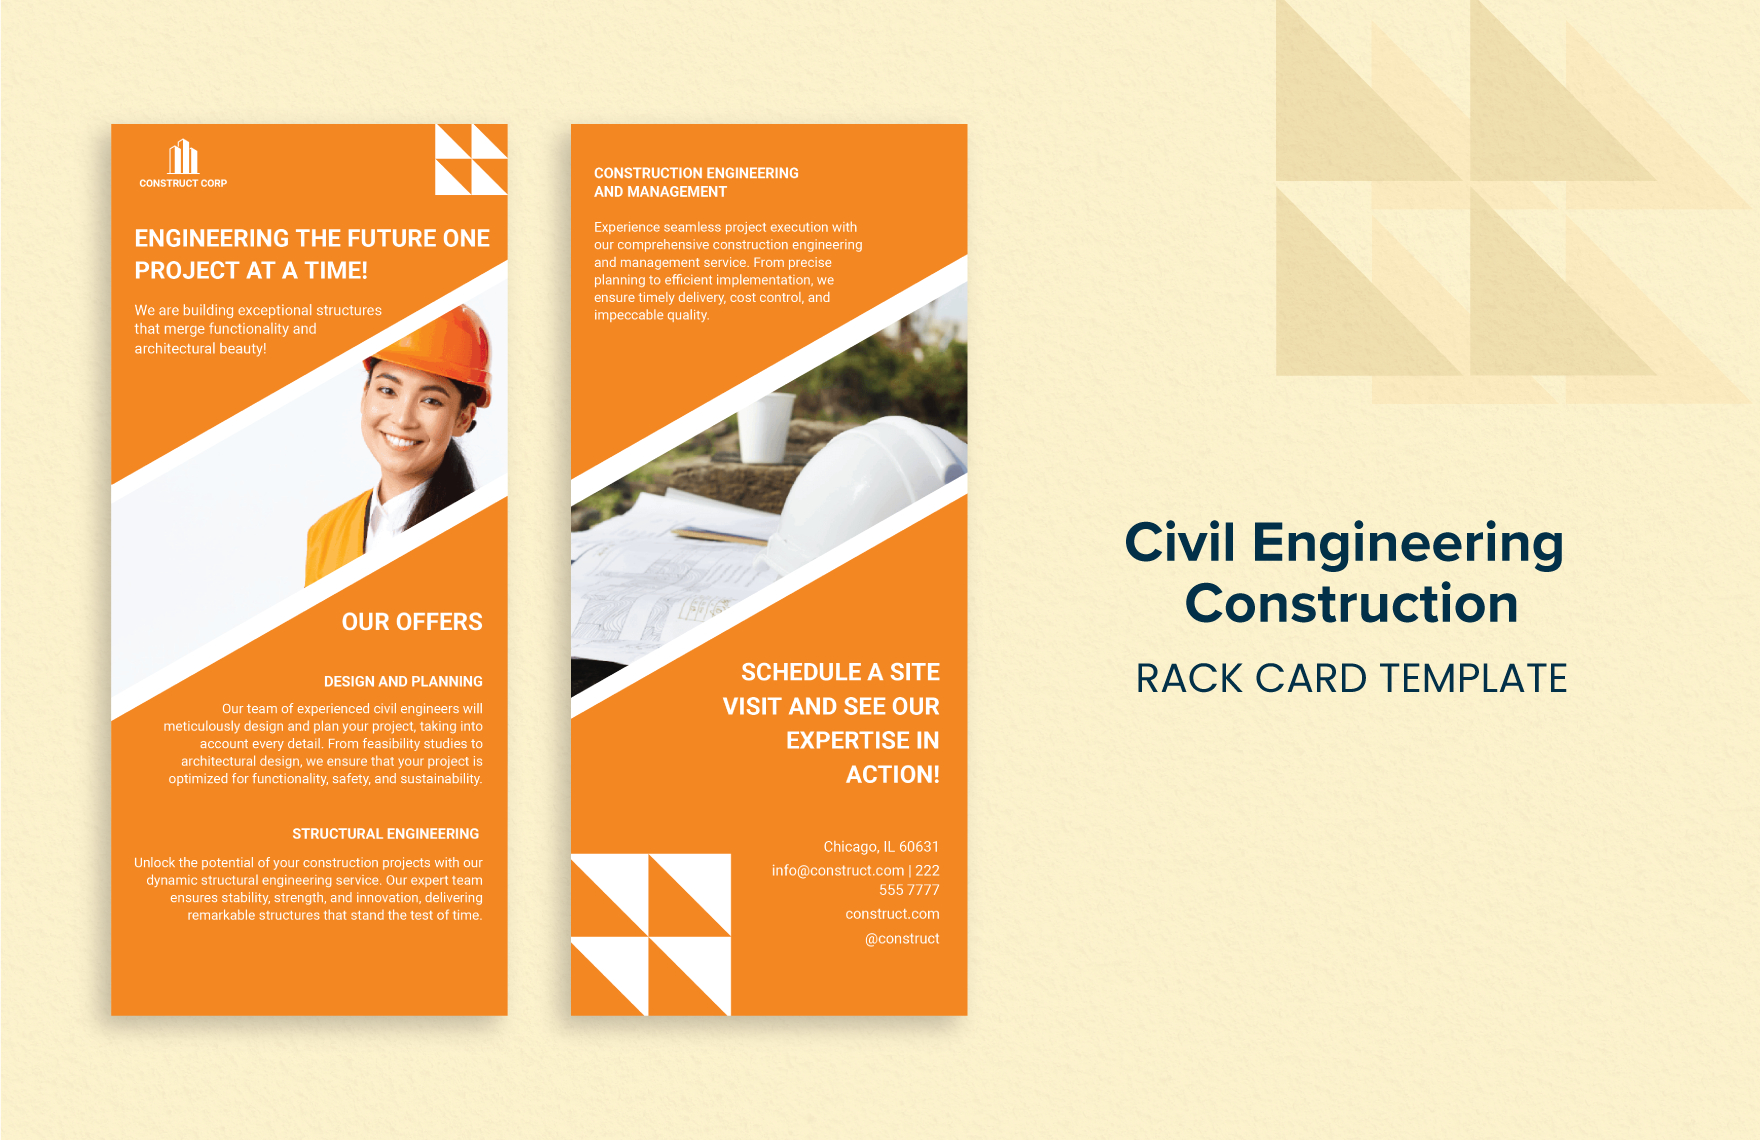 civil engineering construction rack card ideas examples